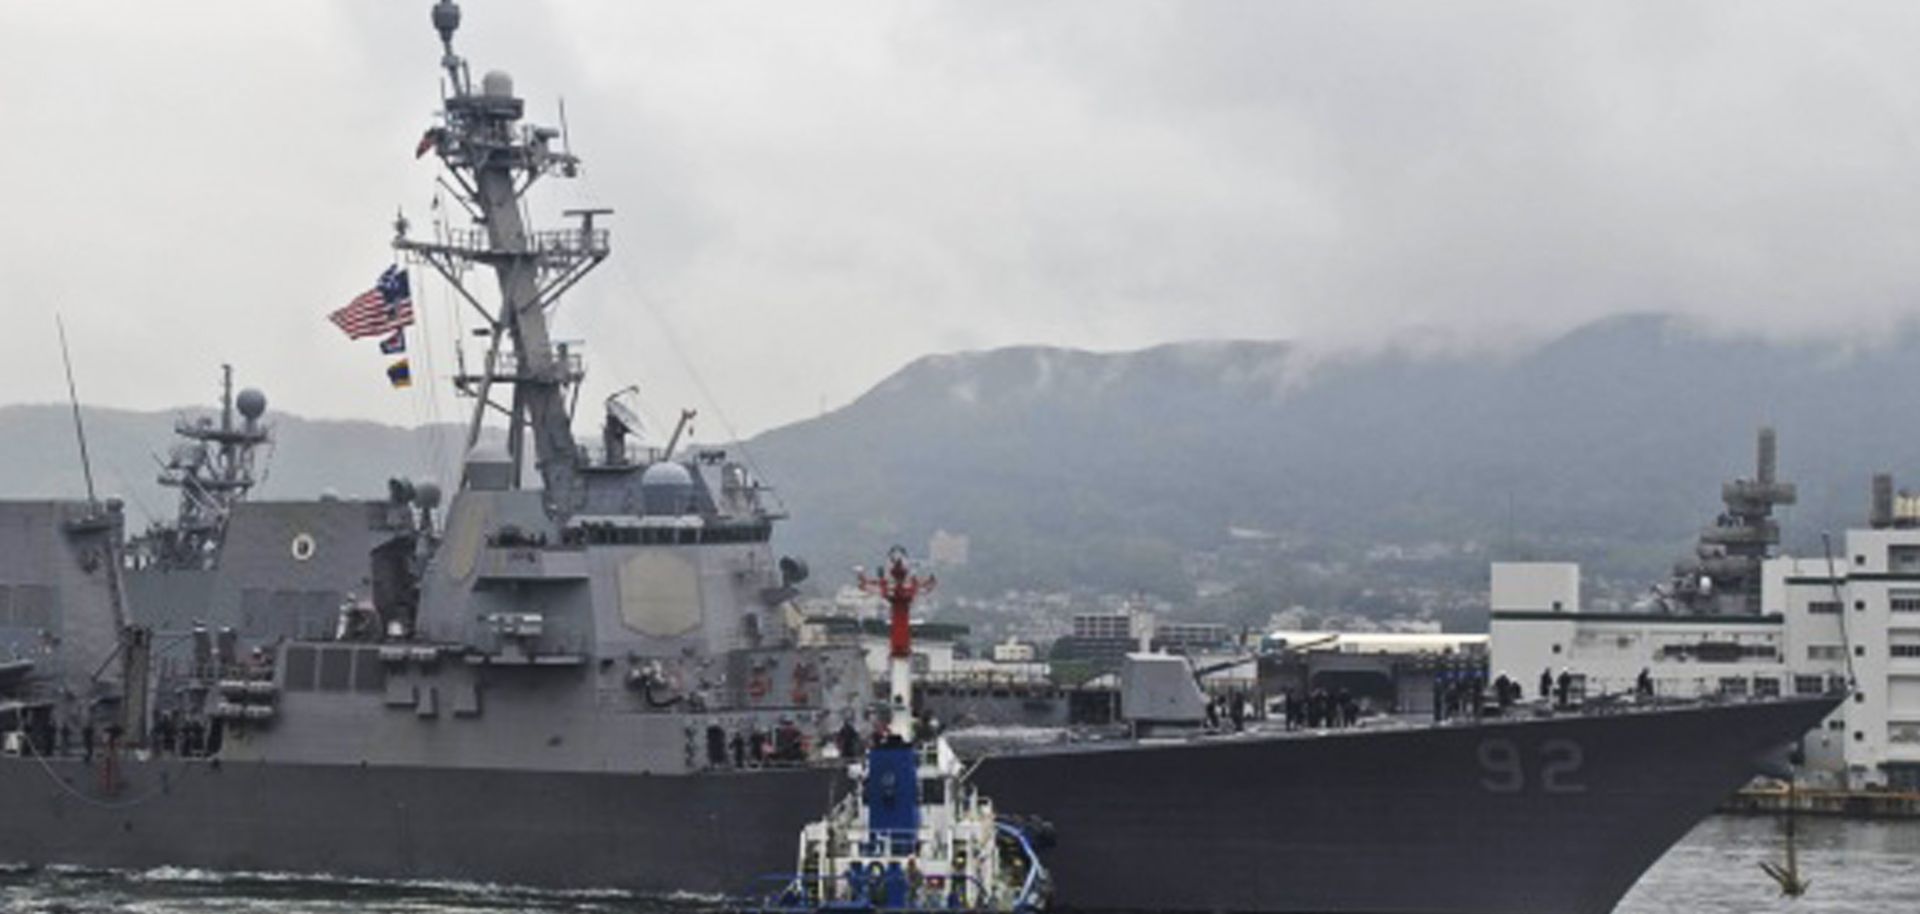 The U.S. Pacific Fleet: Reassuring Allies and Deterring Potential Foes